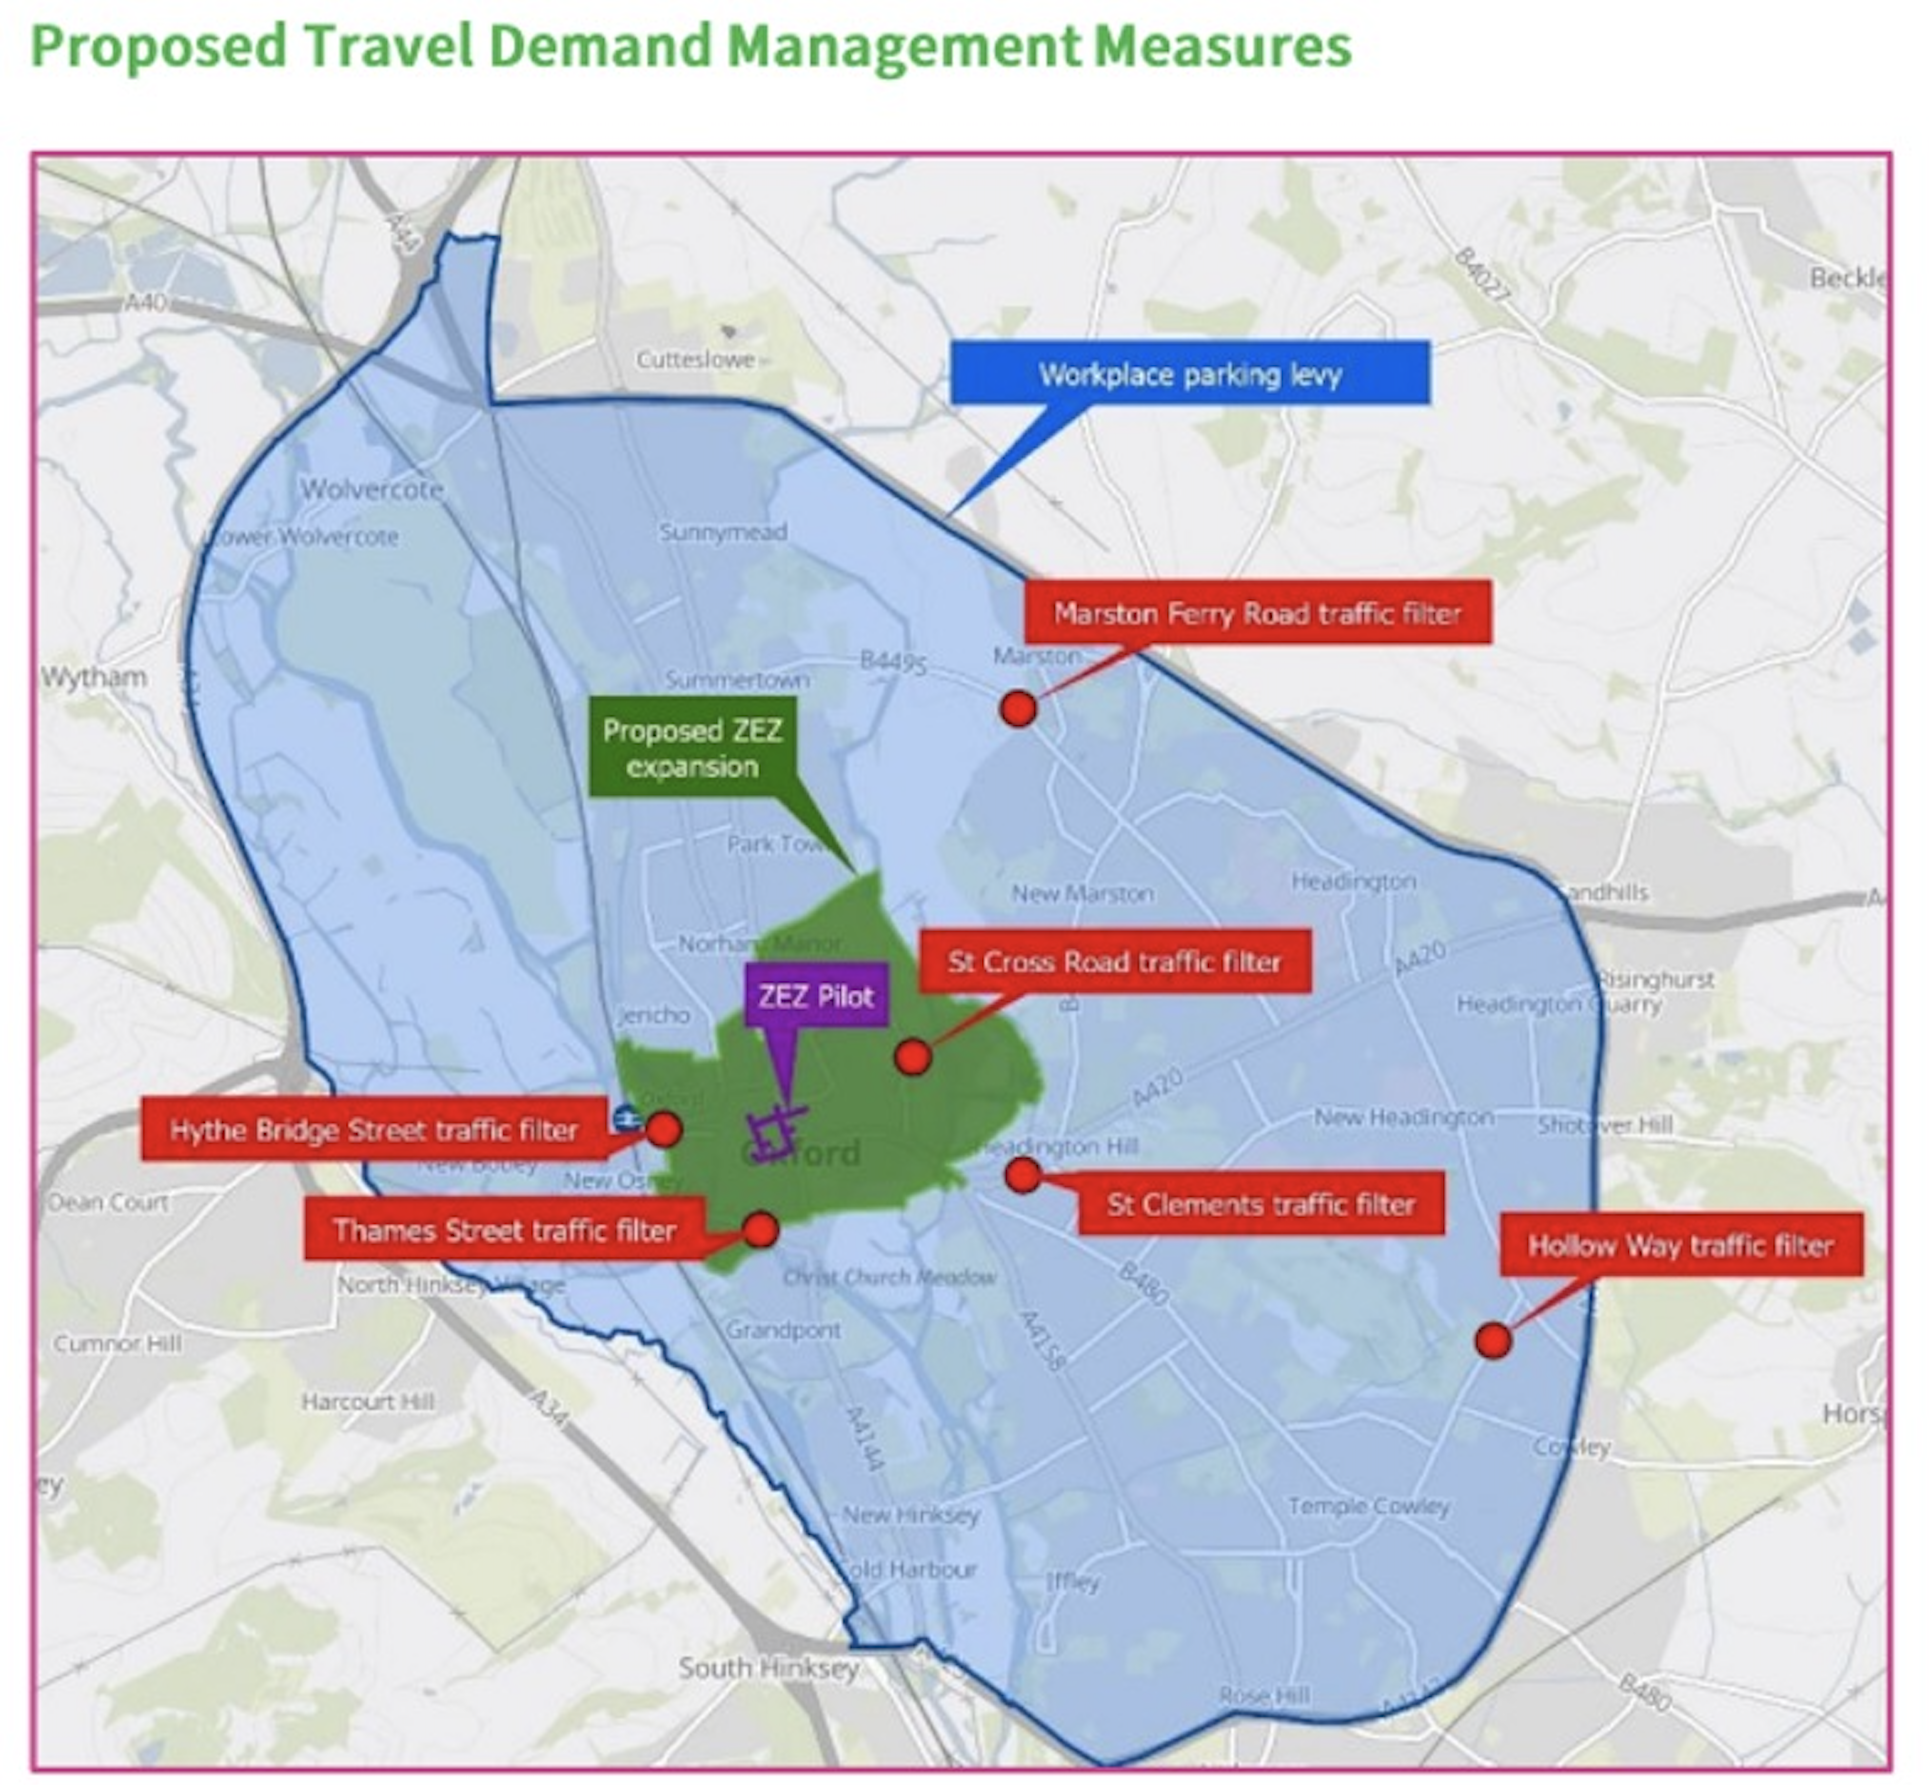 Oxfordshire County Council Cabinet approves the Central Oxfordshire Travel Plan and Traffic Filter scheme